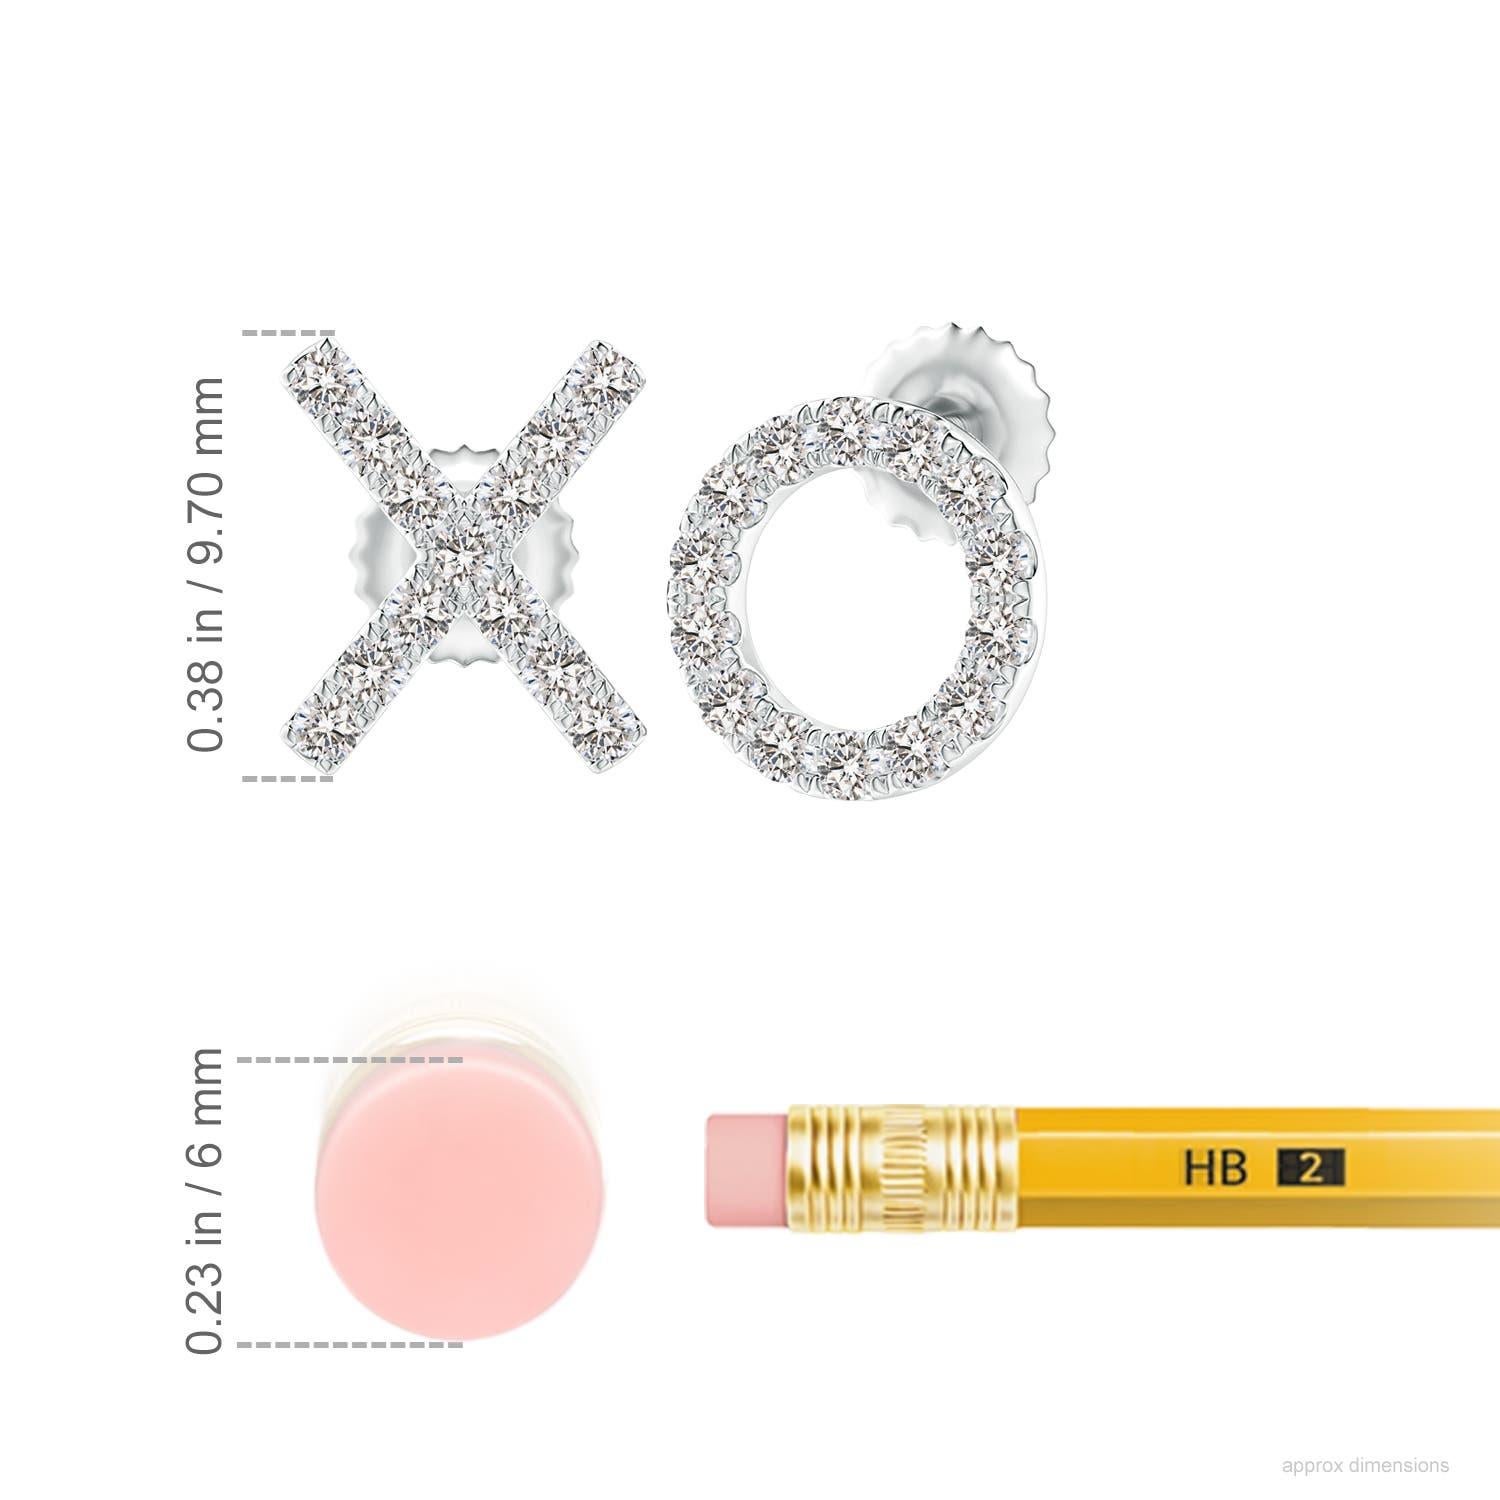 The XO stud earrings designed in 14k white gold are simply fascinating. Sparkling round diamonds in a U pava setting brilliantly embellish the XO pattern, adding a dazzling touch to these adorable stud earrings.
Diamond is the Birthstone for April